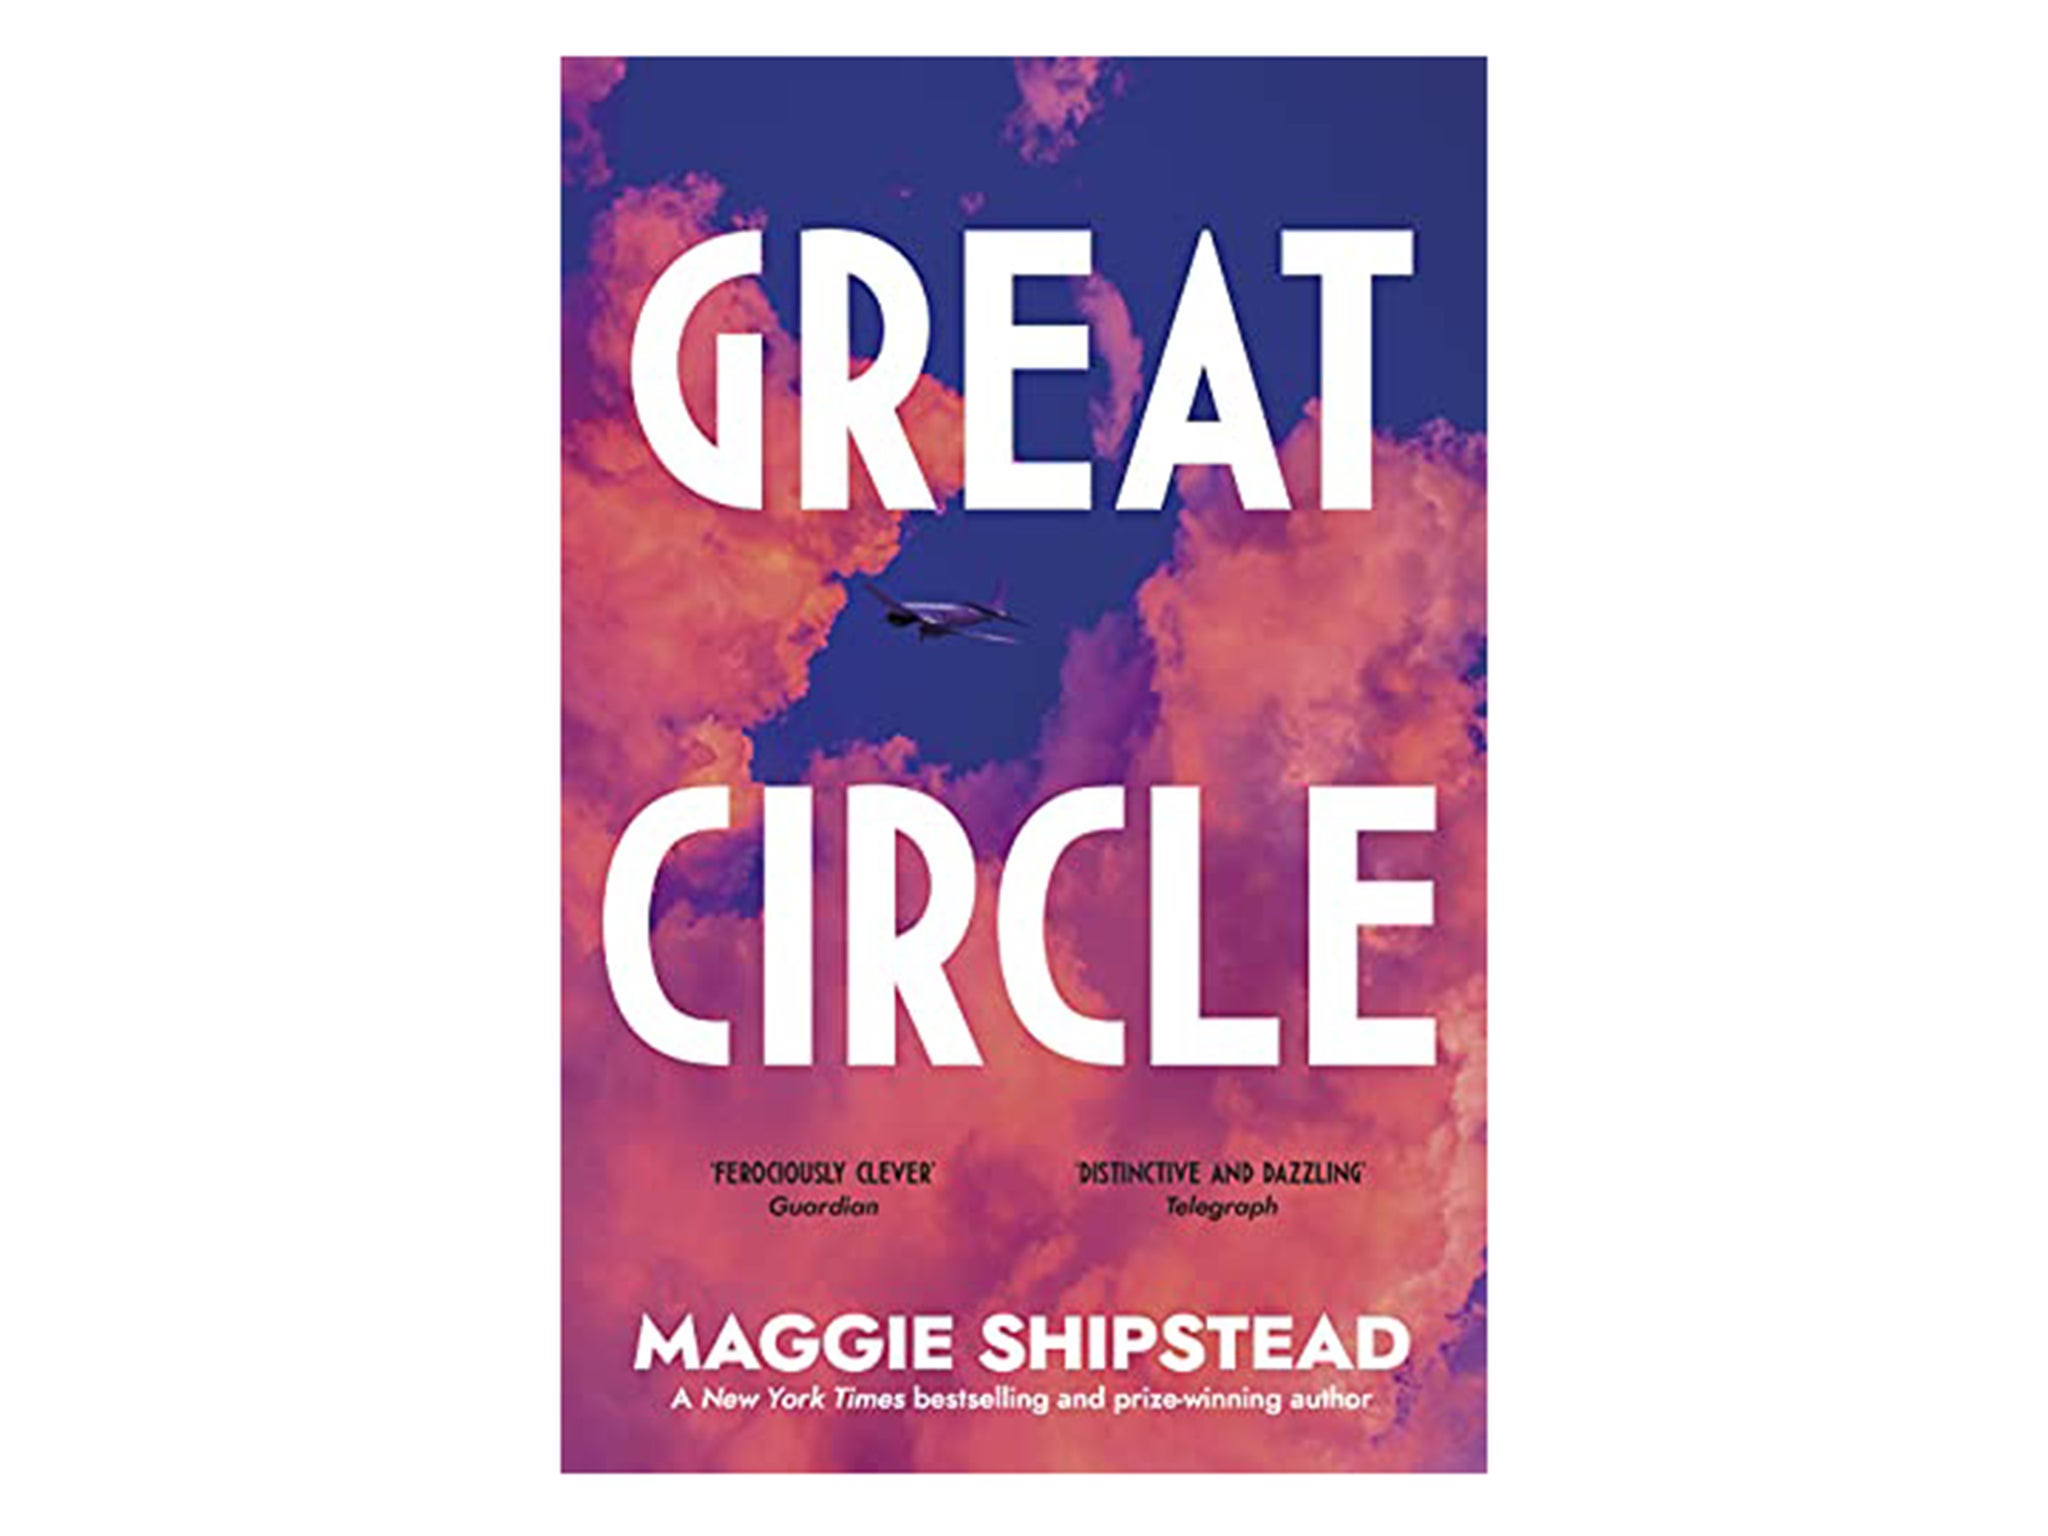 'Great Circle’ by Maggie Shipstead.jpeg